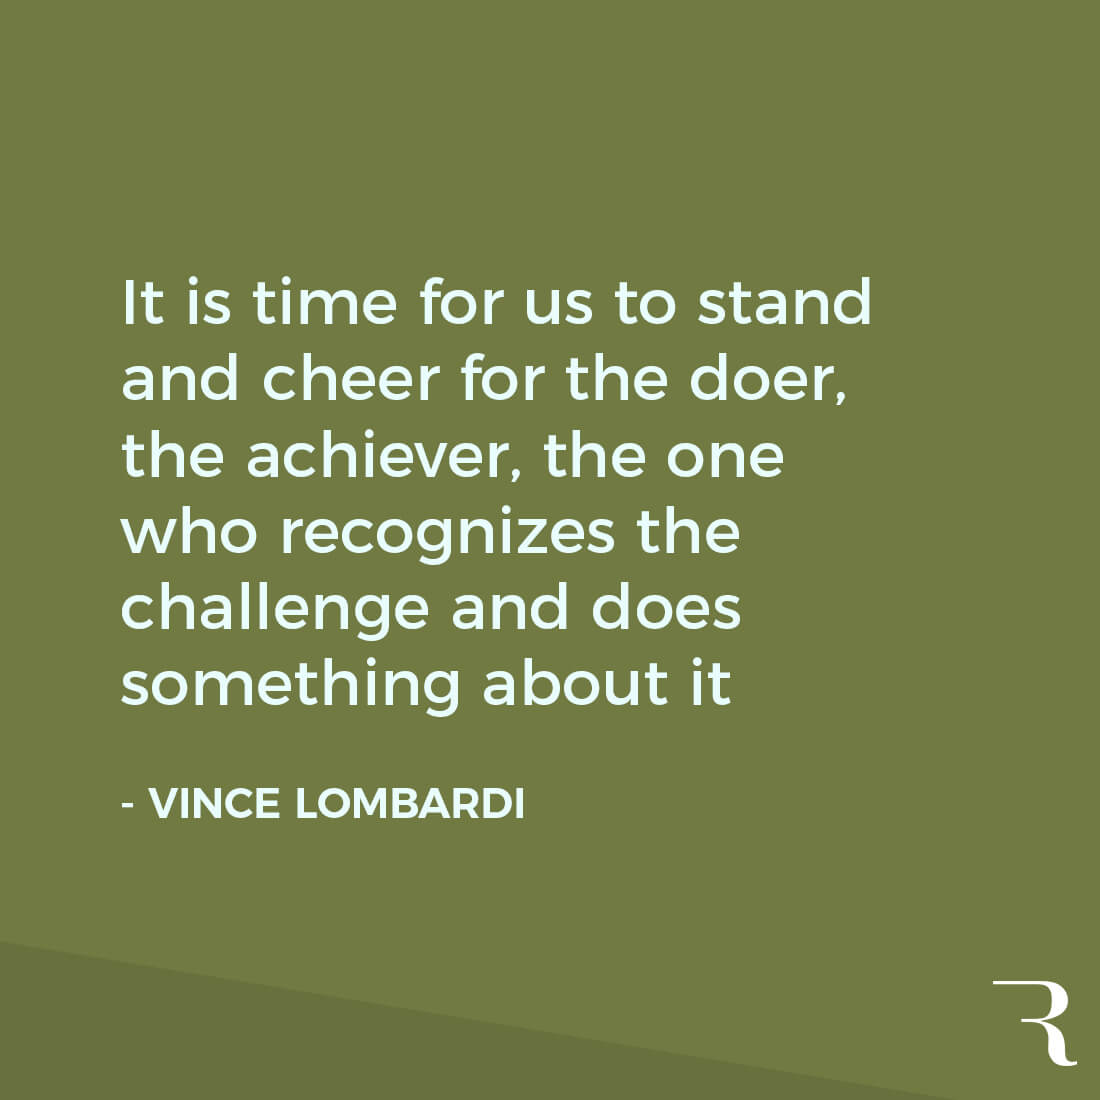 Motivational Quotes: "It's time to stand and cheer for the one who recognizes challenge and does something about it." 112 Motivational Quotes to Be a Better Entrepreneur